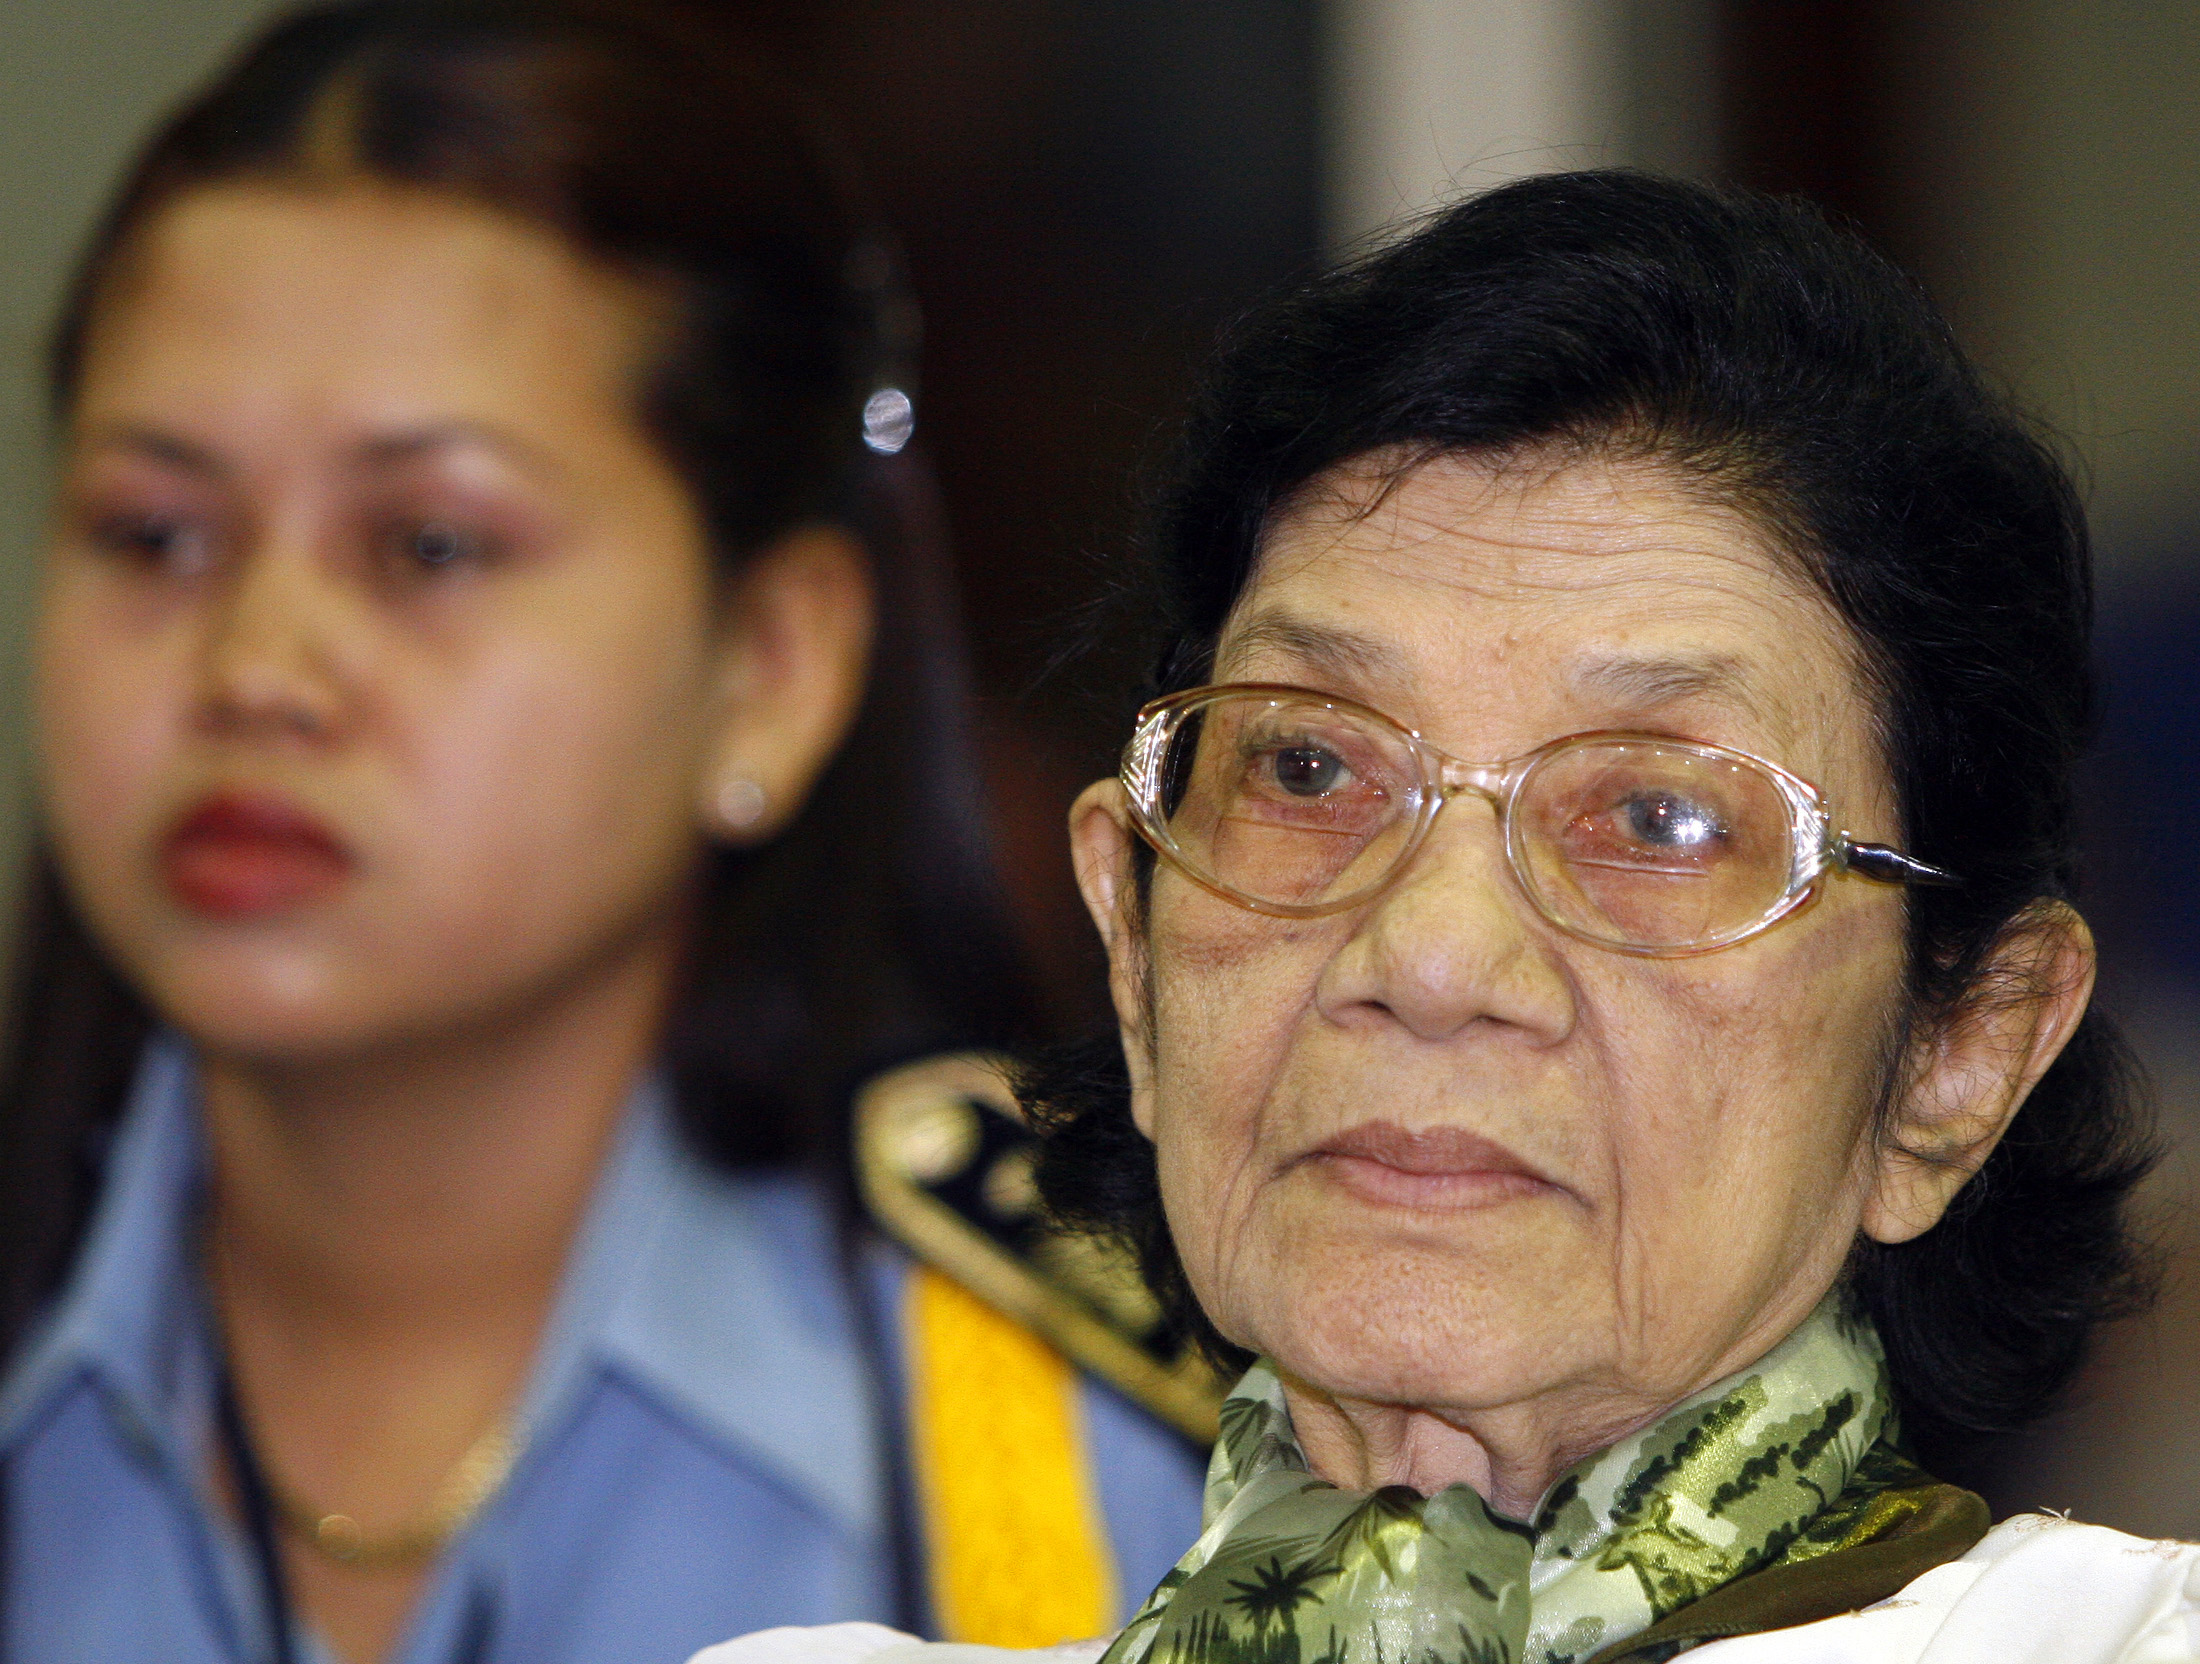 Ieng Thirith, social affairs minister under Khmer Rouge regime, sits during her pre-trial chamber public hearing at Extraordinary Chambers in Courts of Cambodia